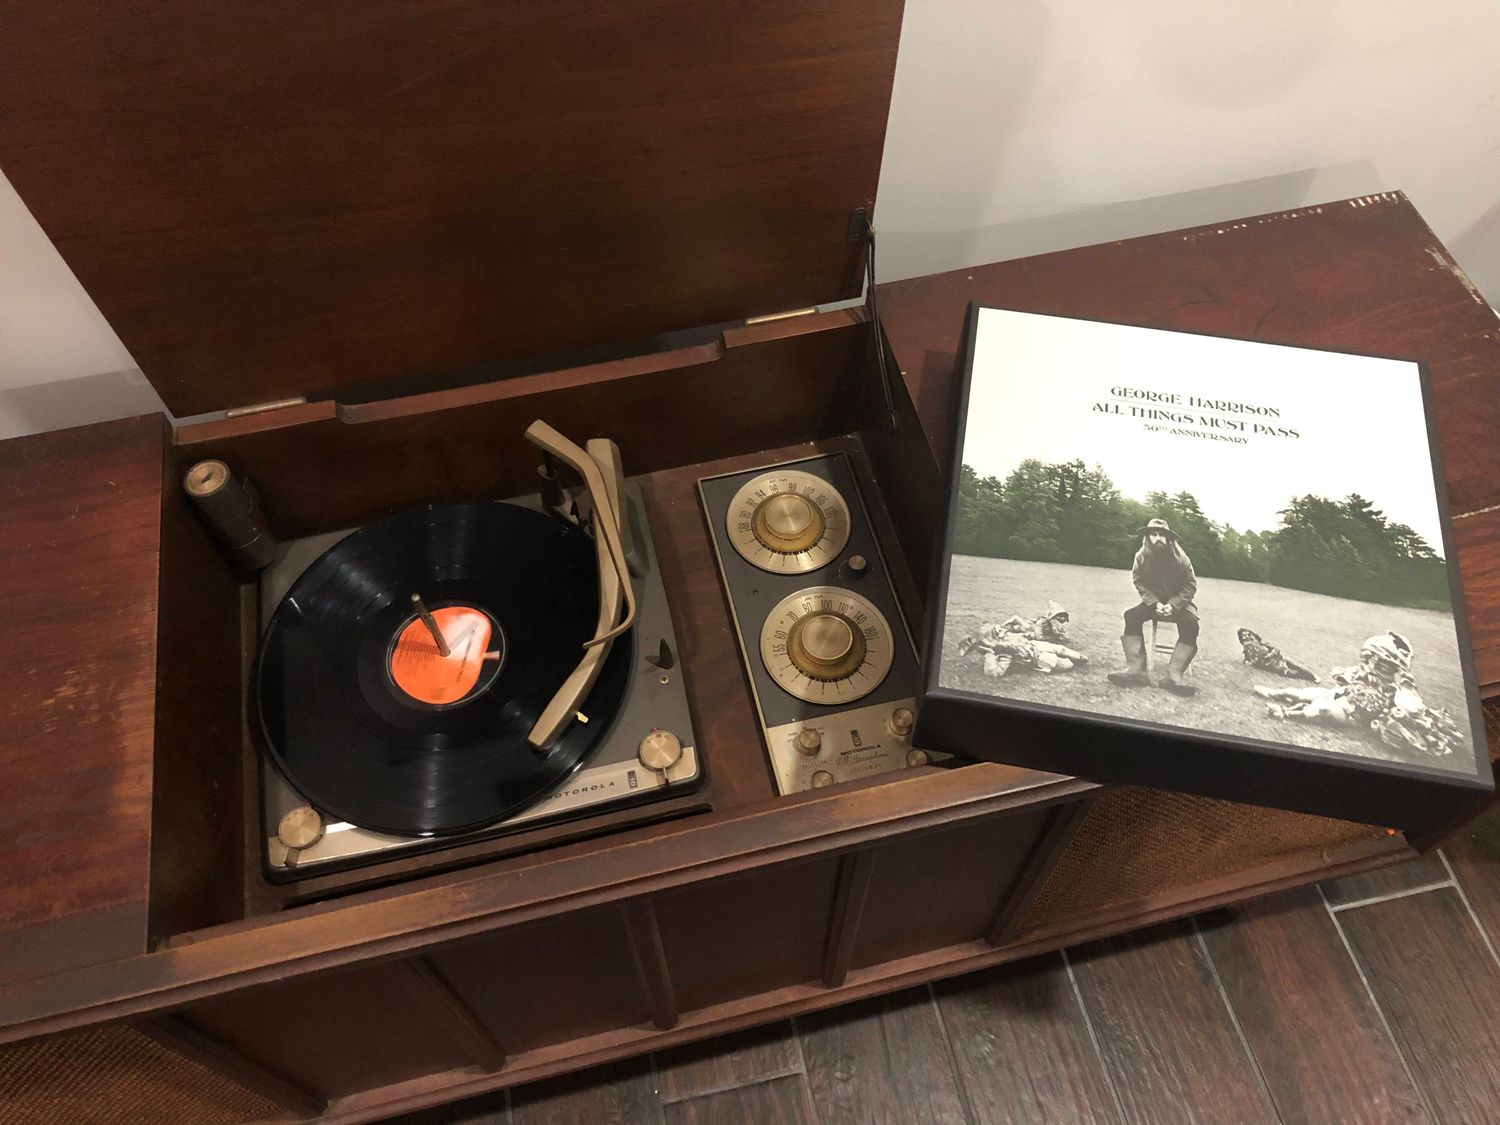 How To Hook A Newer Component Turntable To An Old Console Stereo